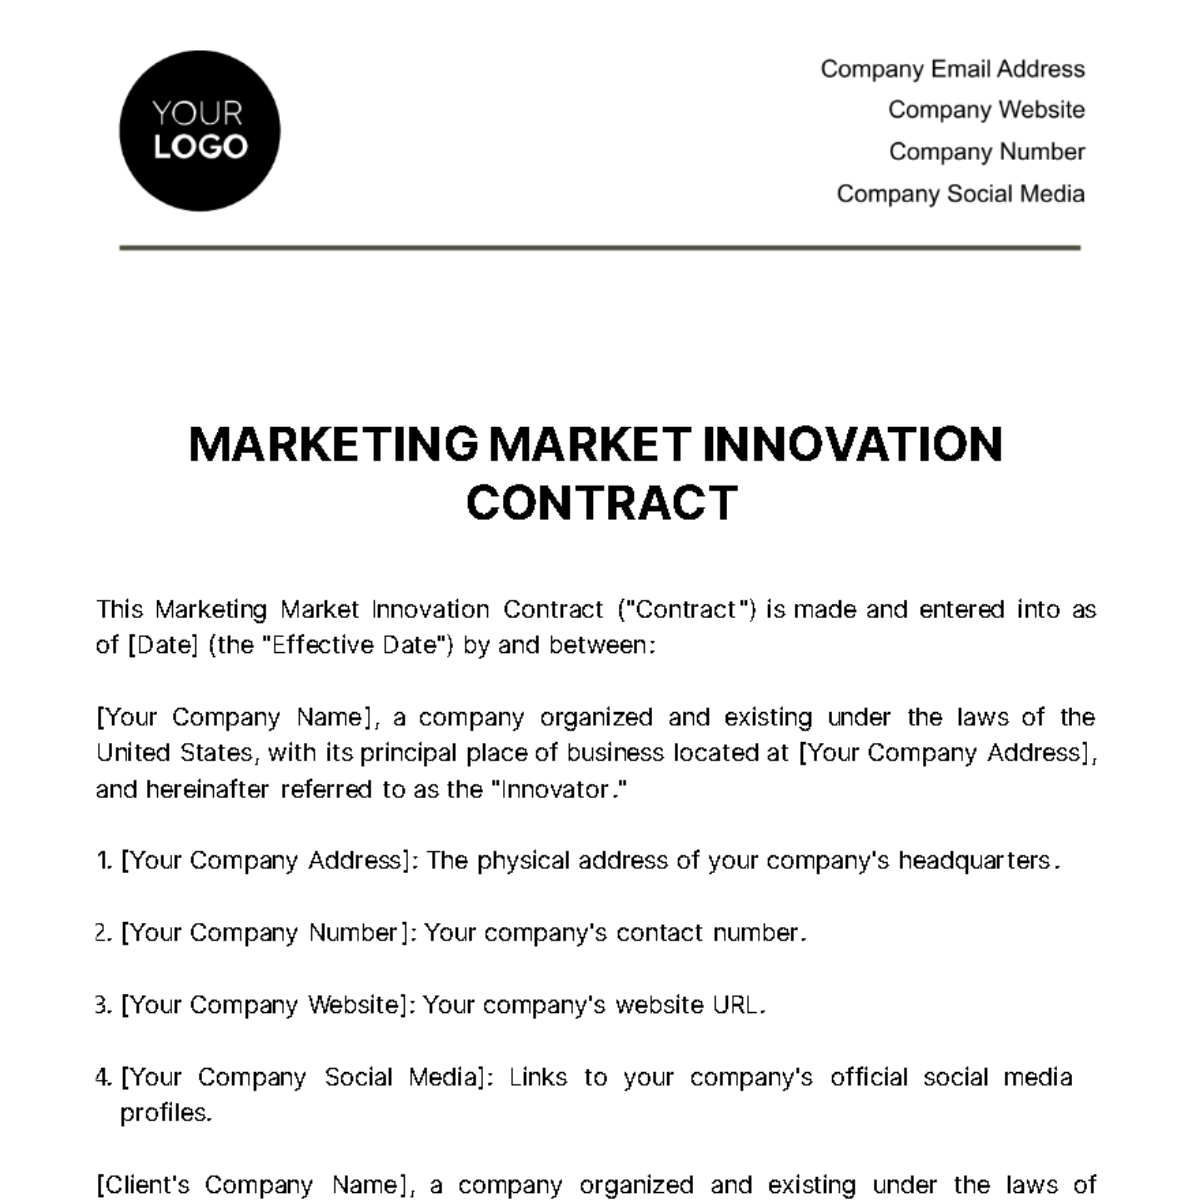 Marketing Market Innovation Contract Template